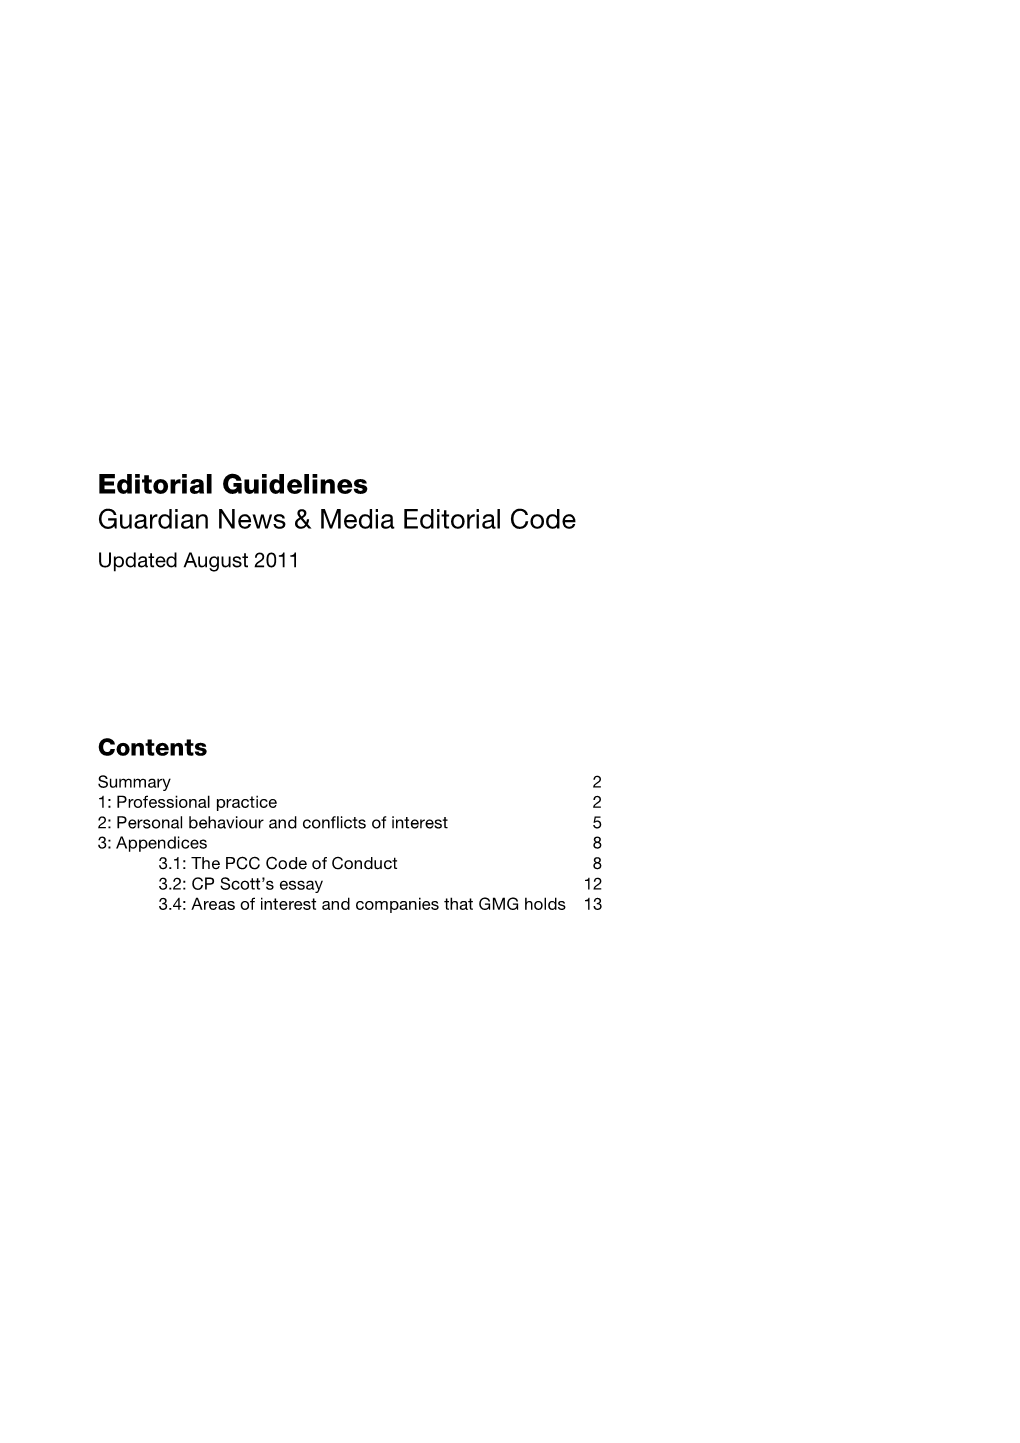 Editorial Guidelines Guardian News & Media Editorial Code Updated August 2011